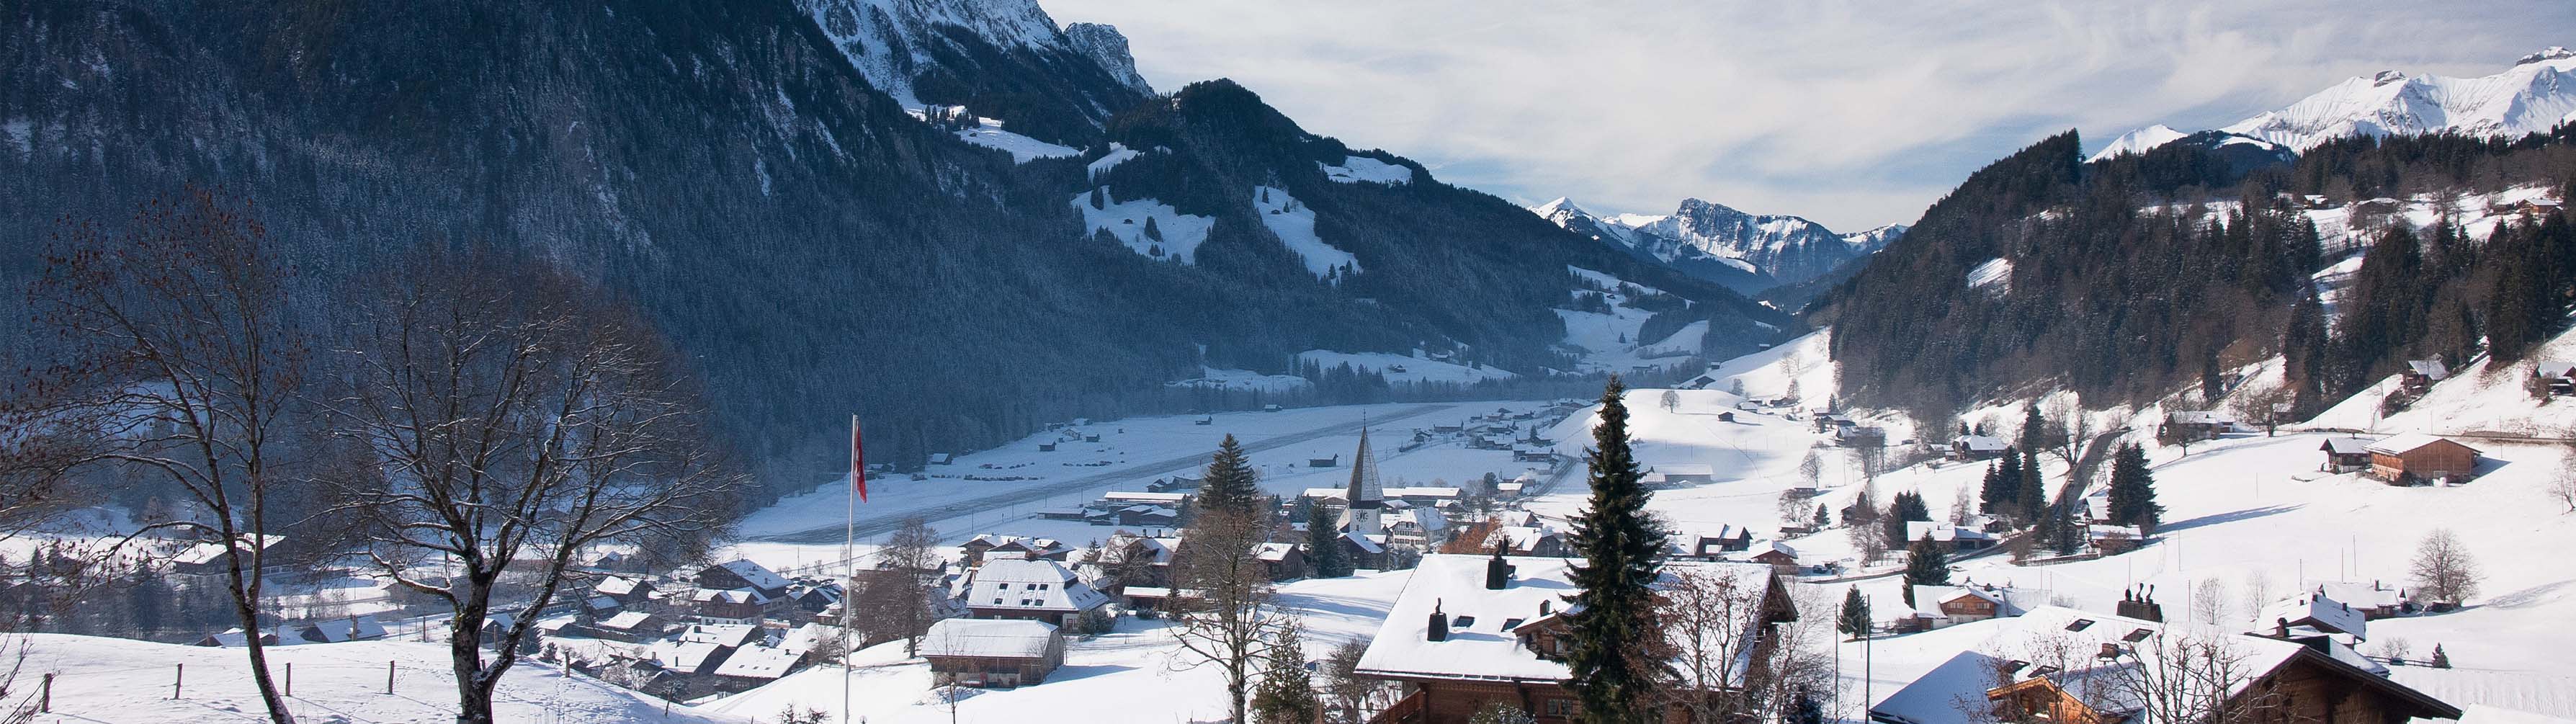 The white valley ans mountain slopes of beautiful Gstaad.